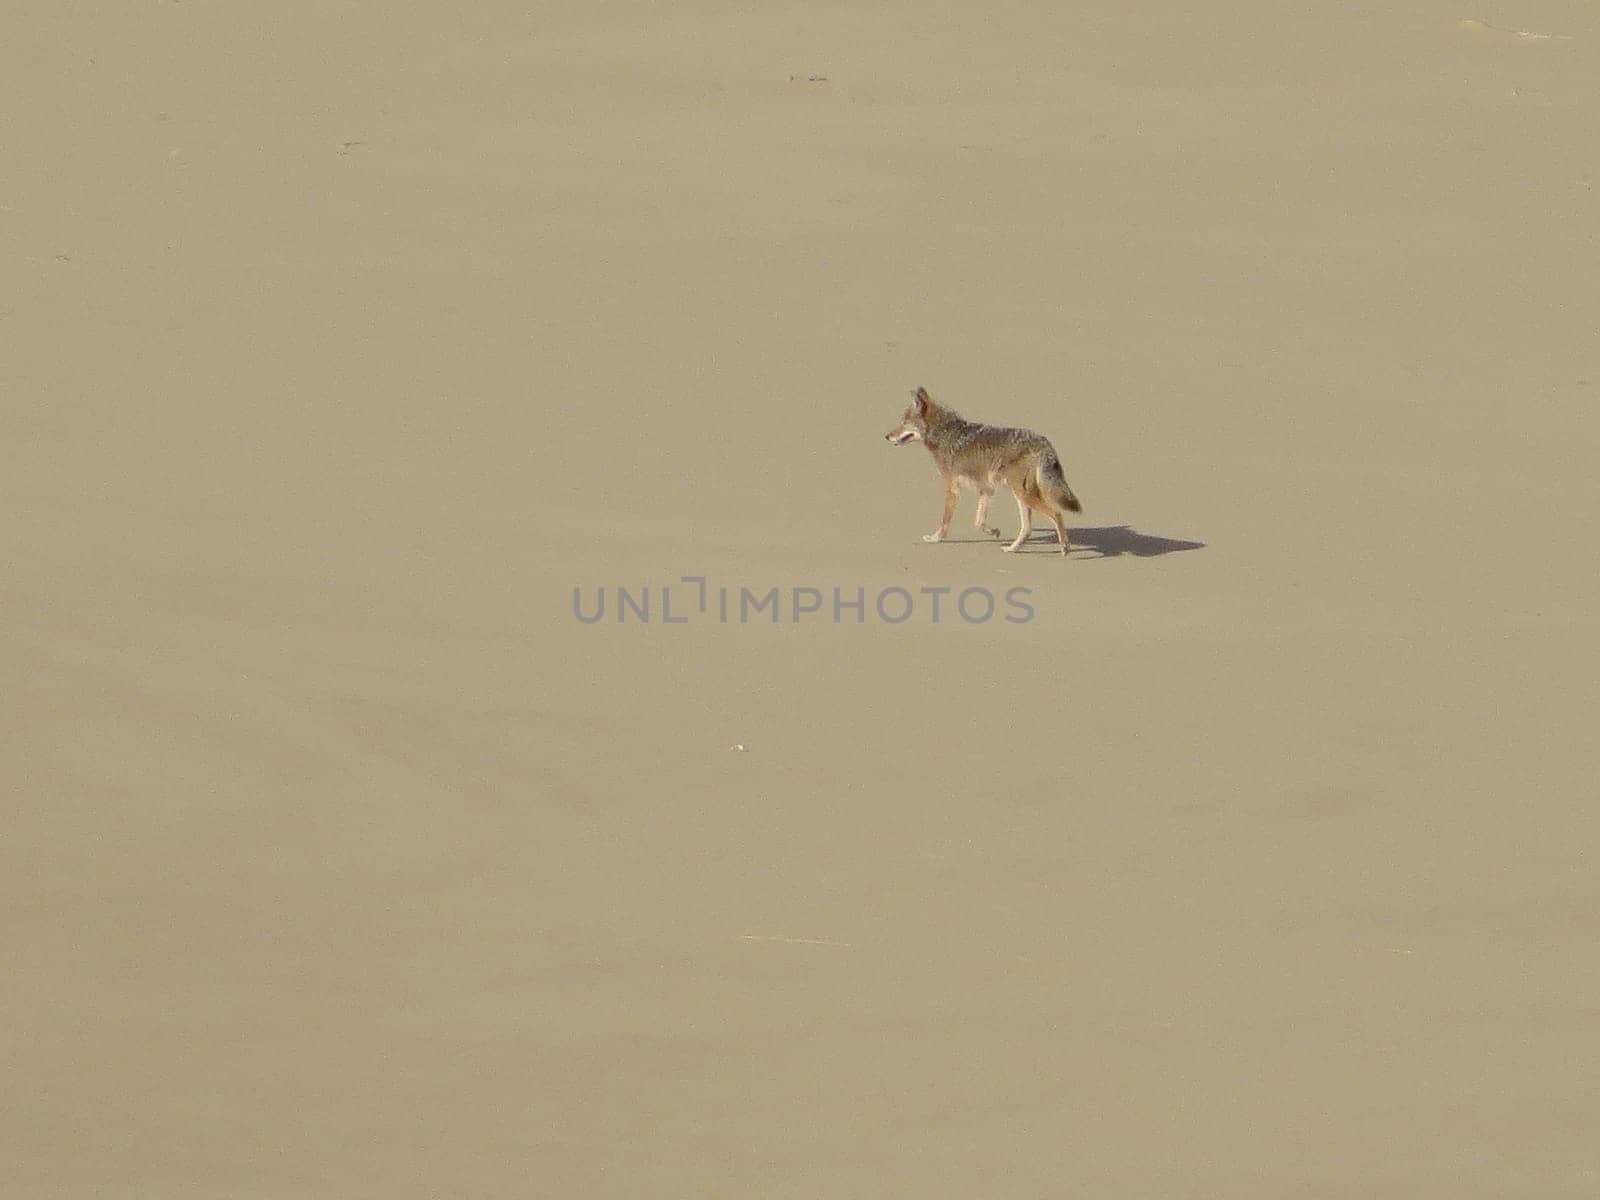 View of One Lonely Coyote on Sandy Beach . High quality photo